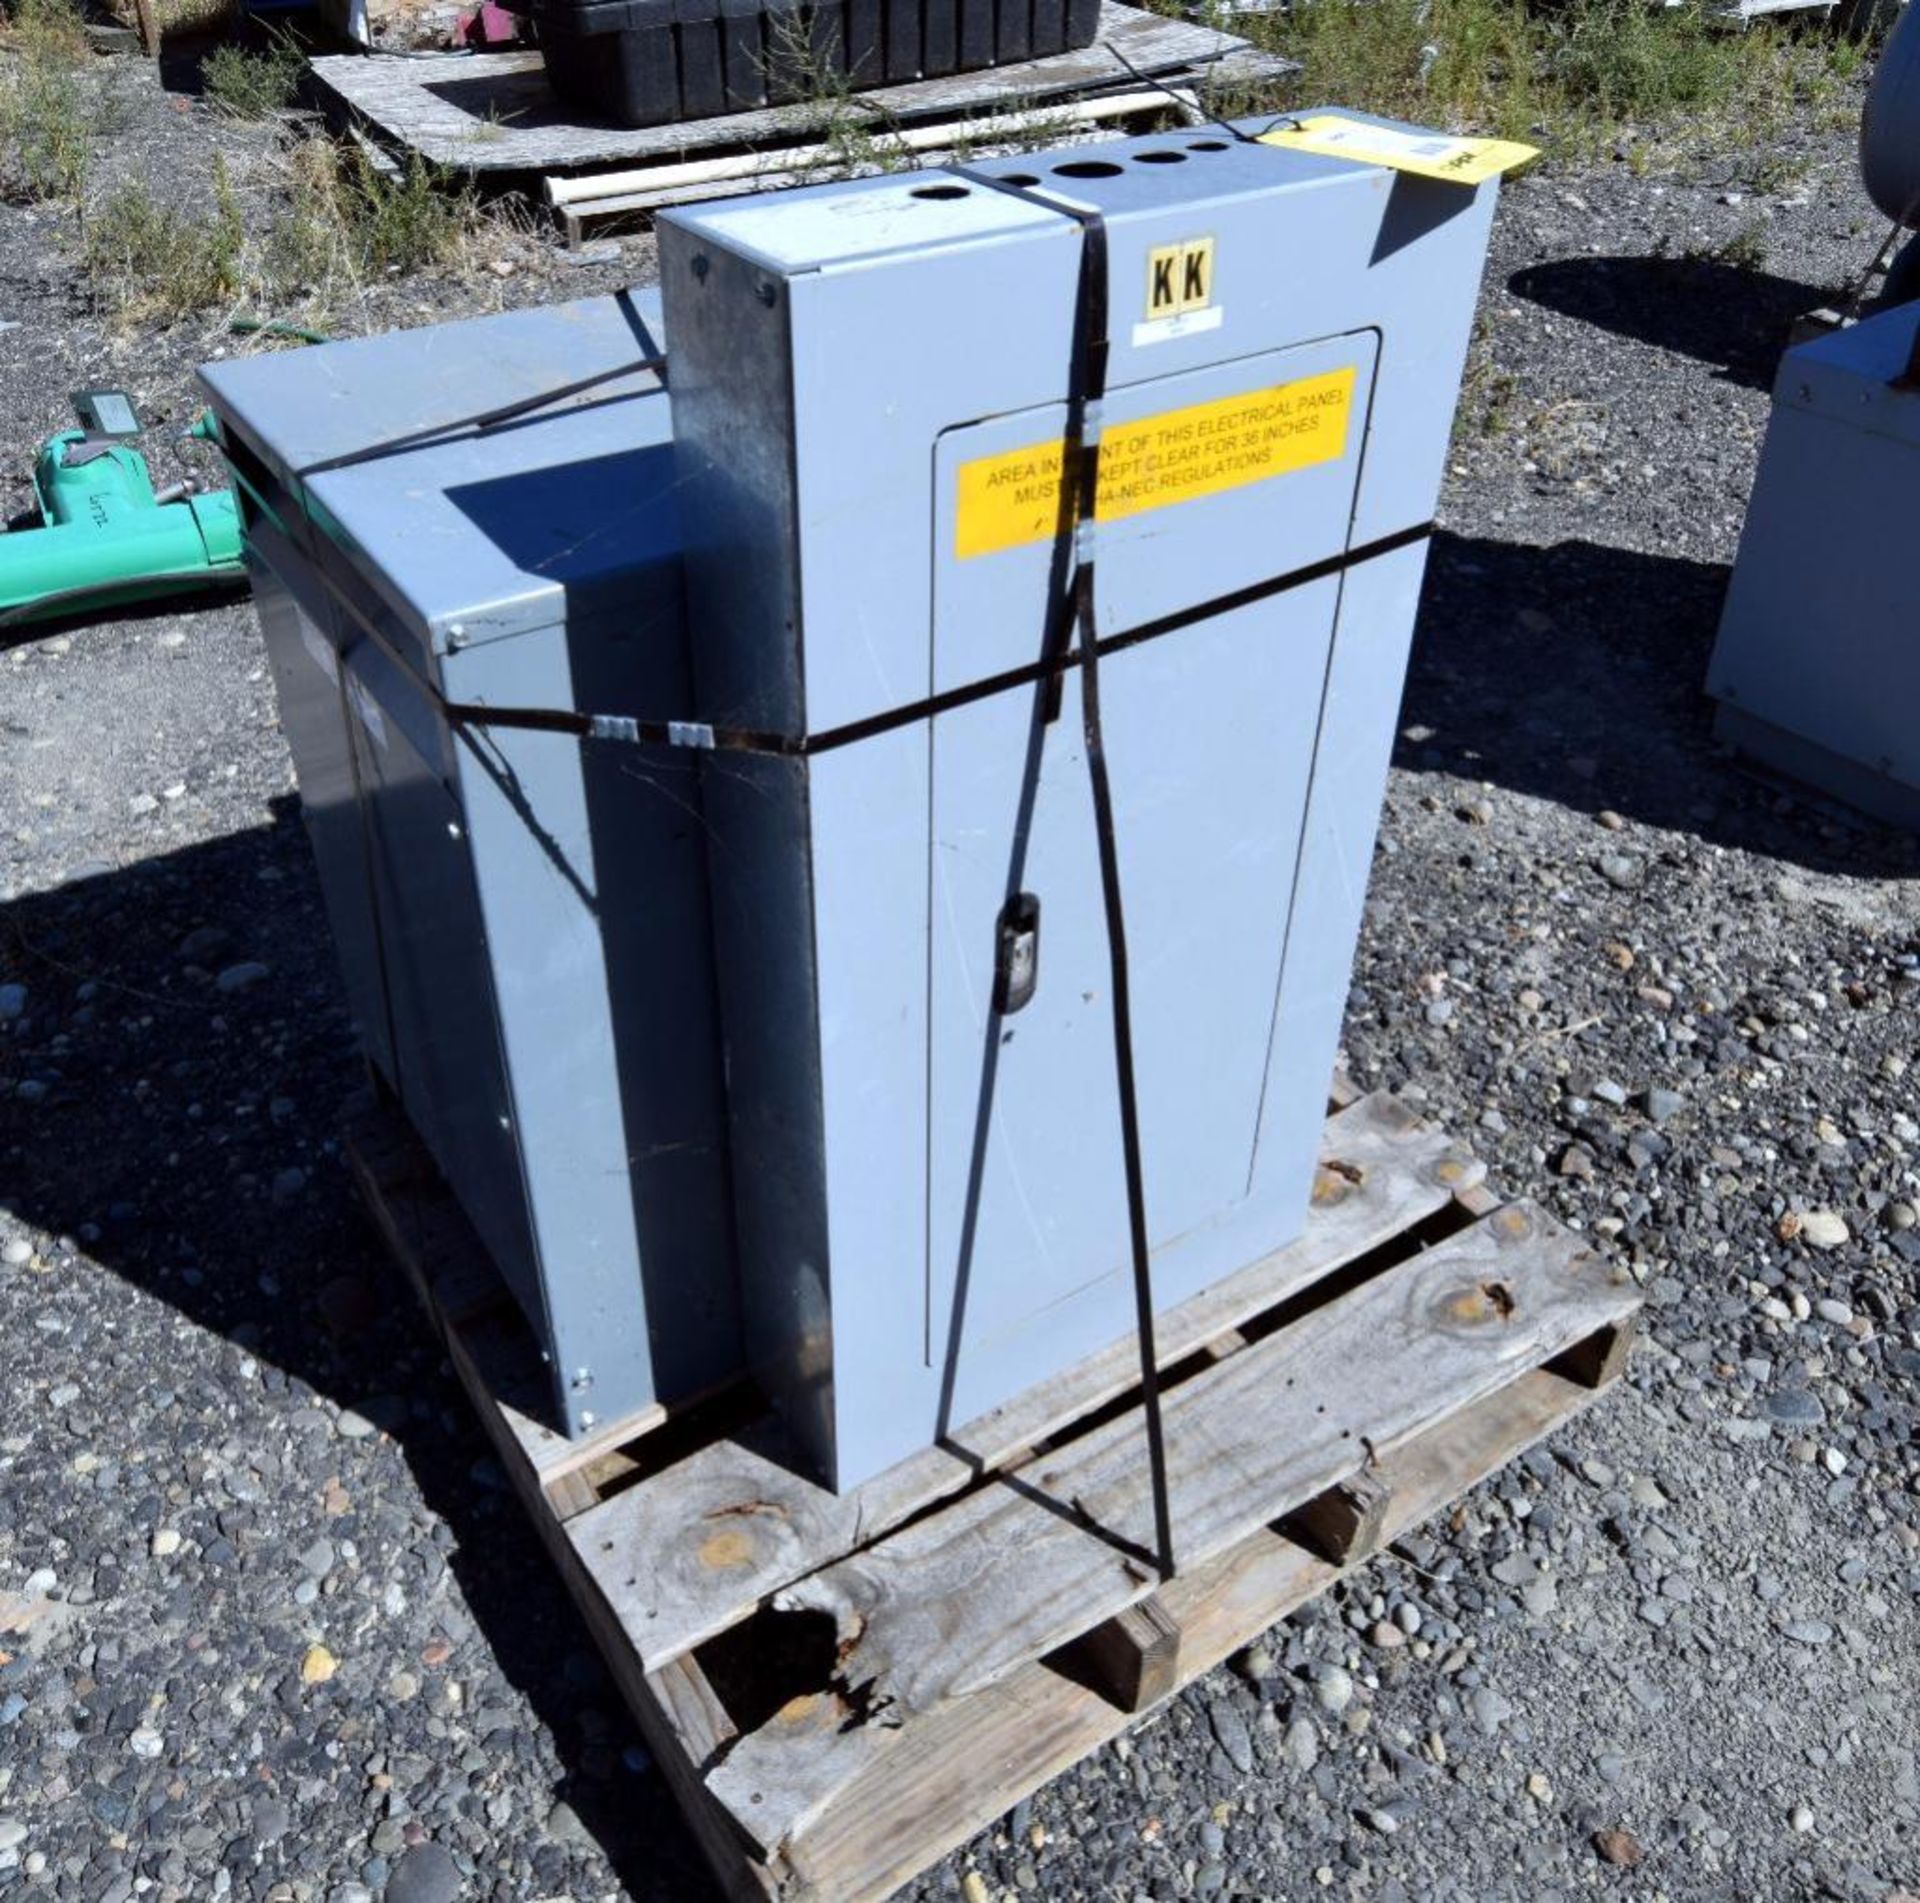 LOT: (1) Square D 45 KVA transformer, Catalog# 45T3H, style 33749-17212-082, date code 9902, type SO